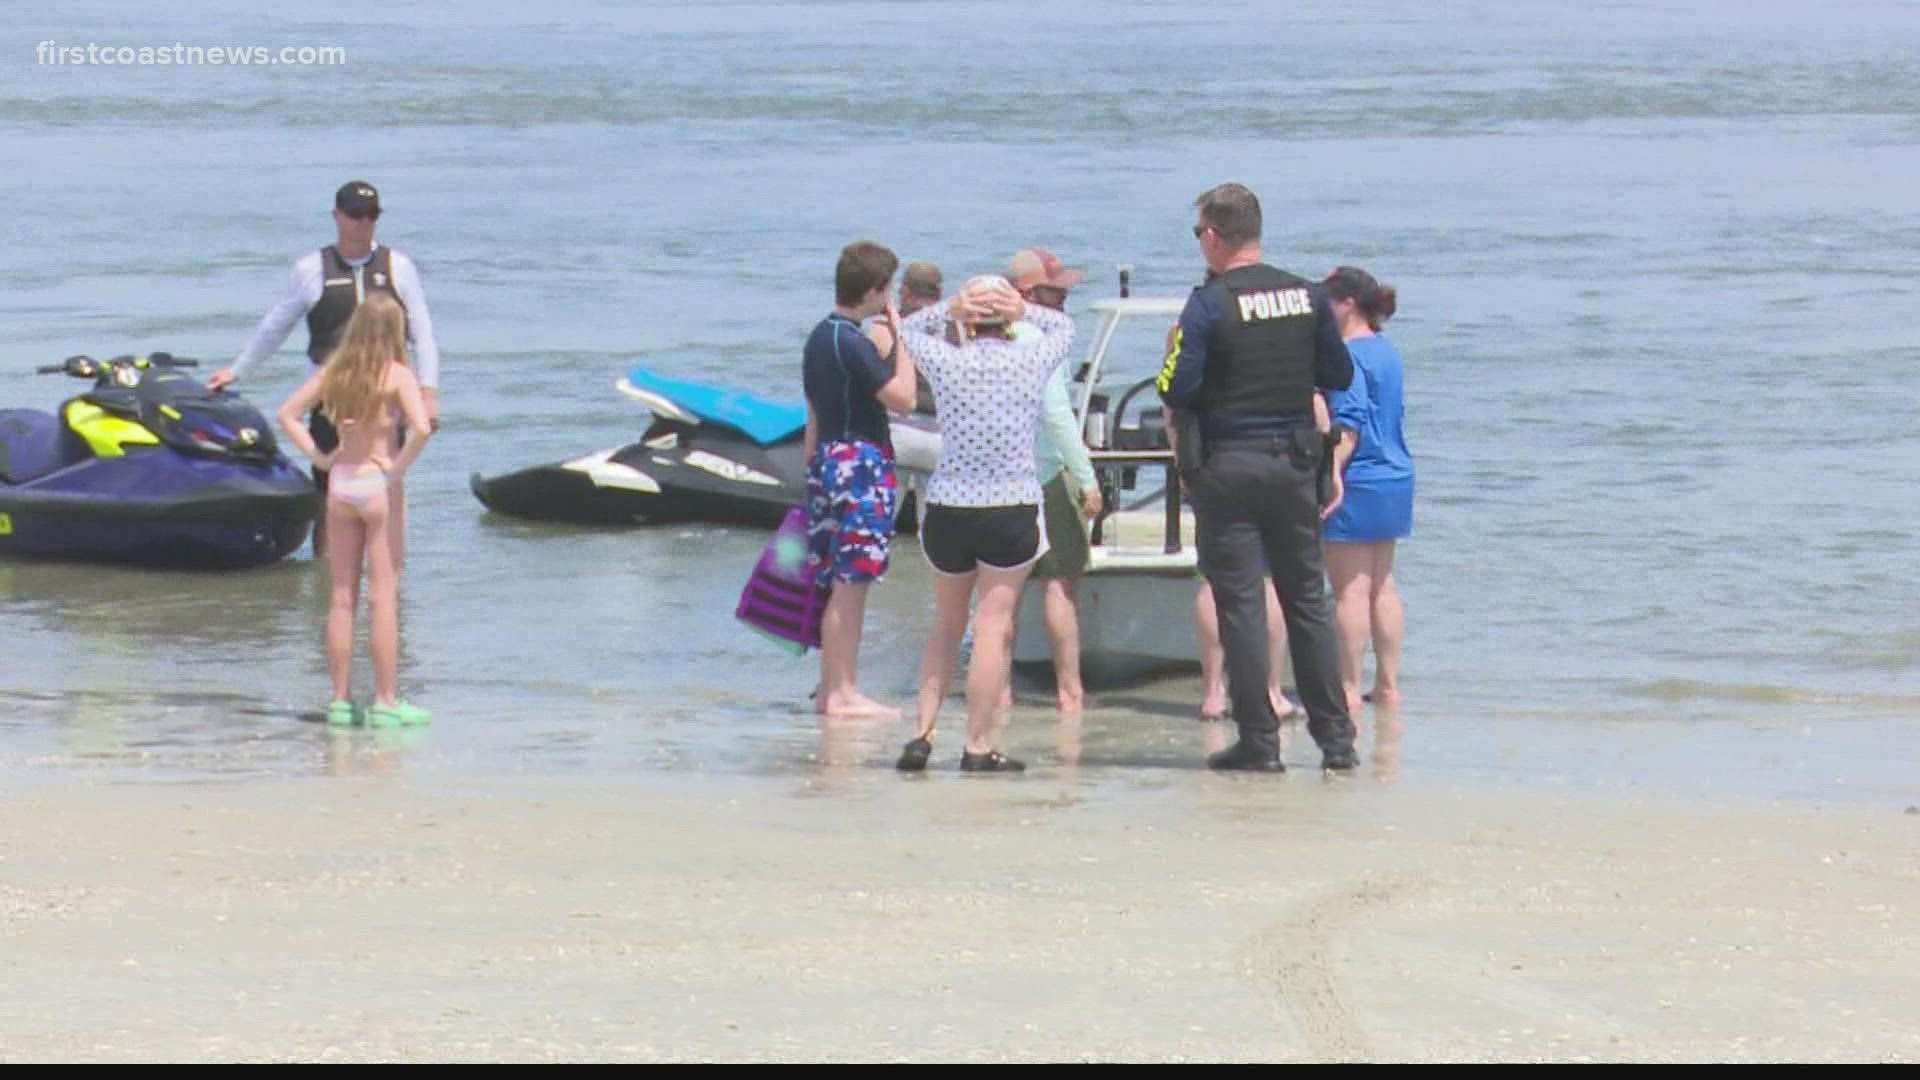 One of the jet skis flipped over to leave the man and child floating, while the second was caught on a sandbar where the man and child could stand.